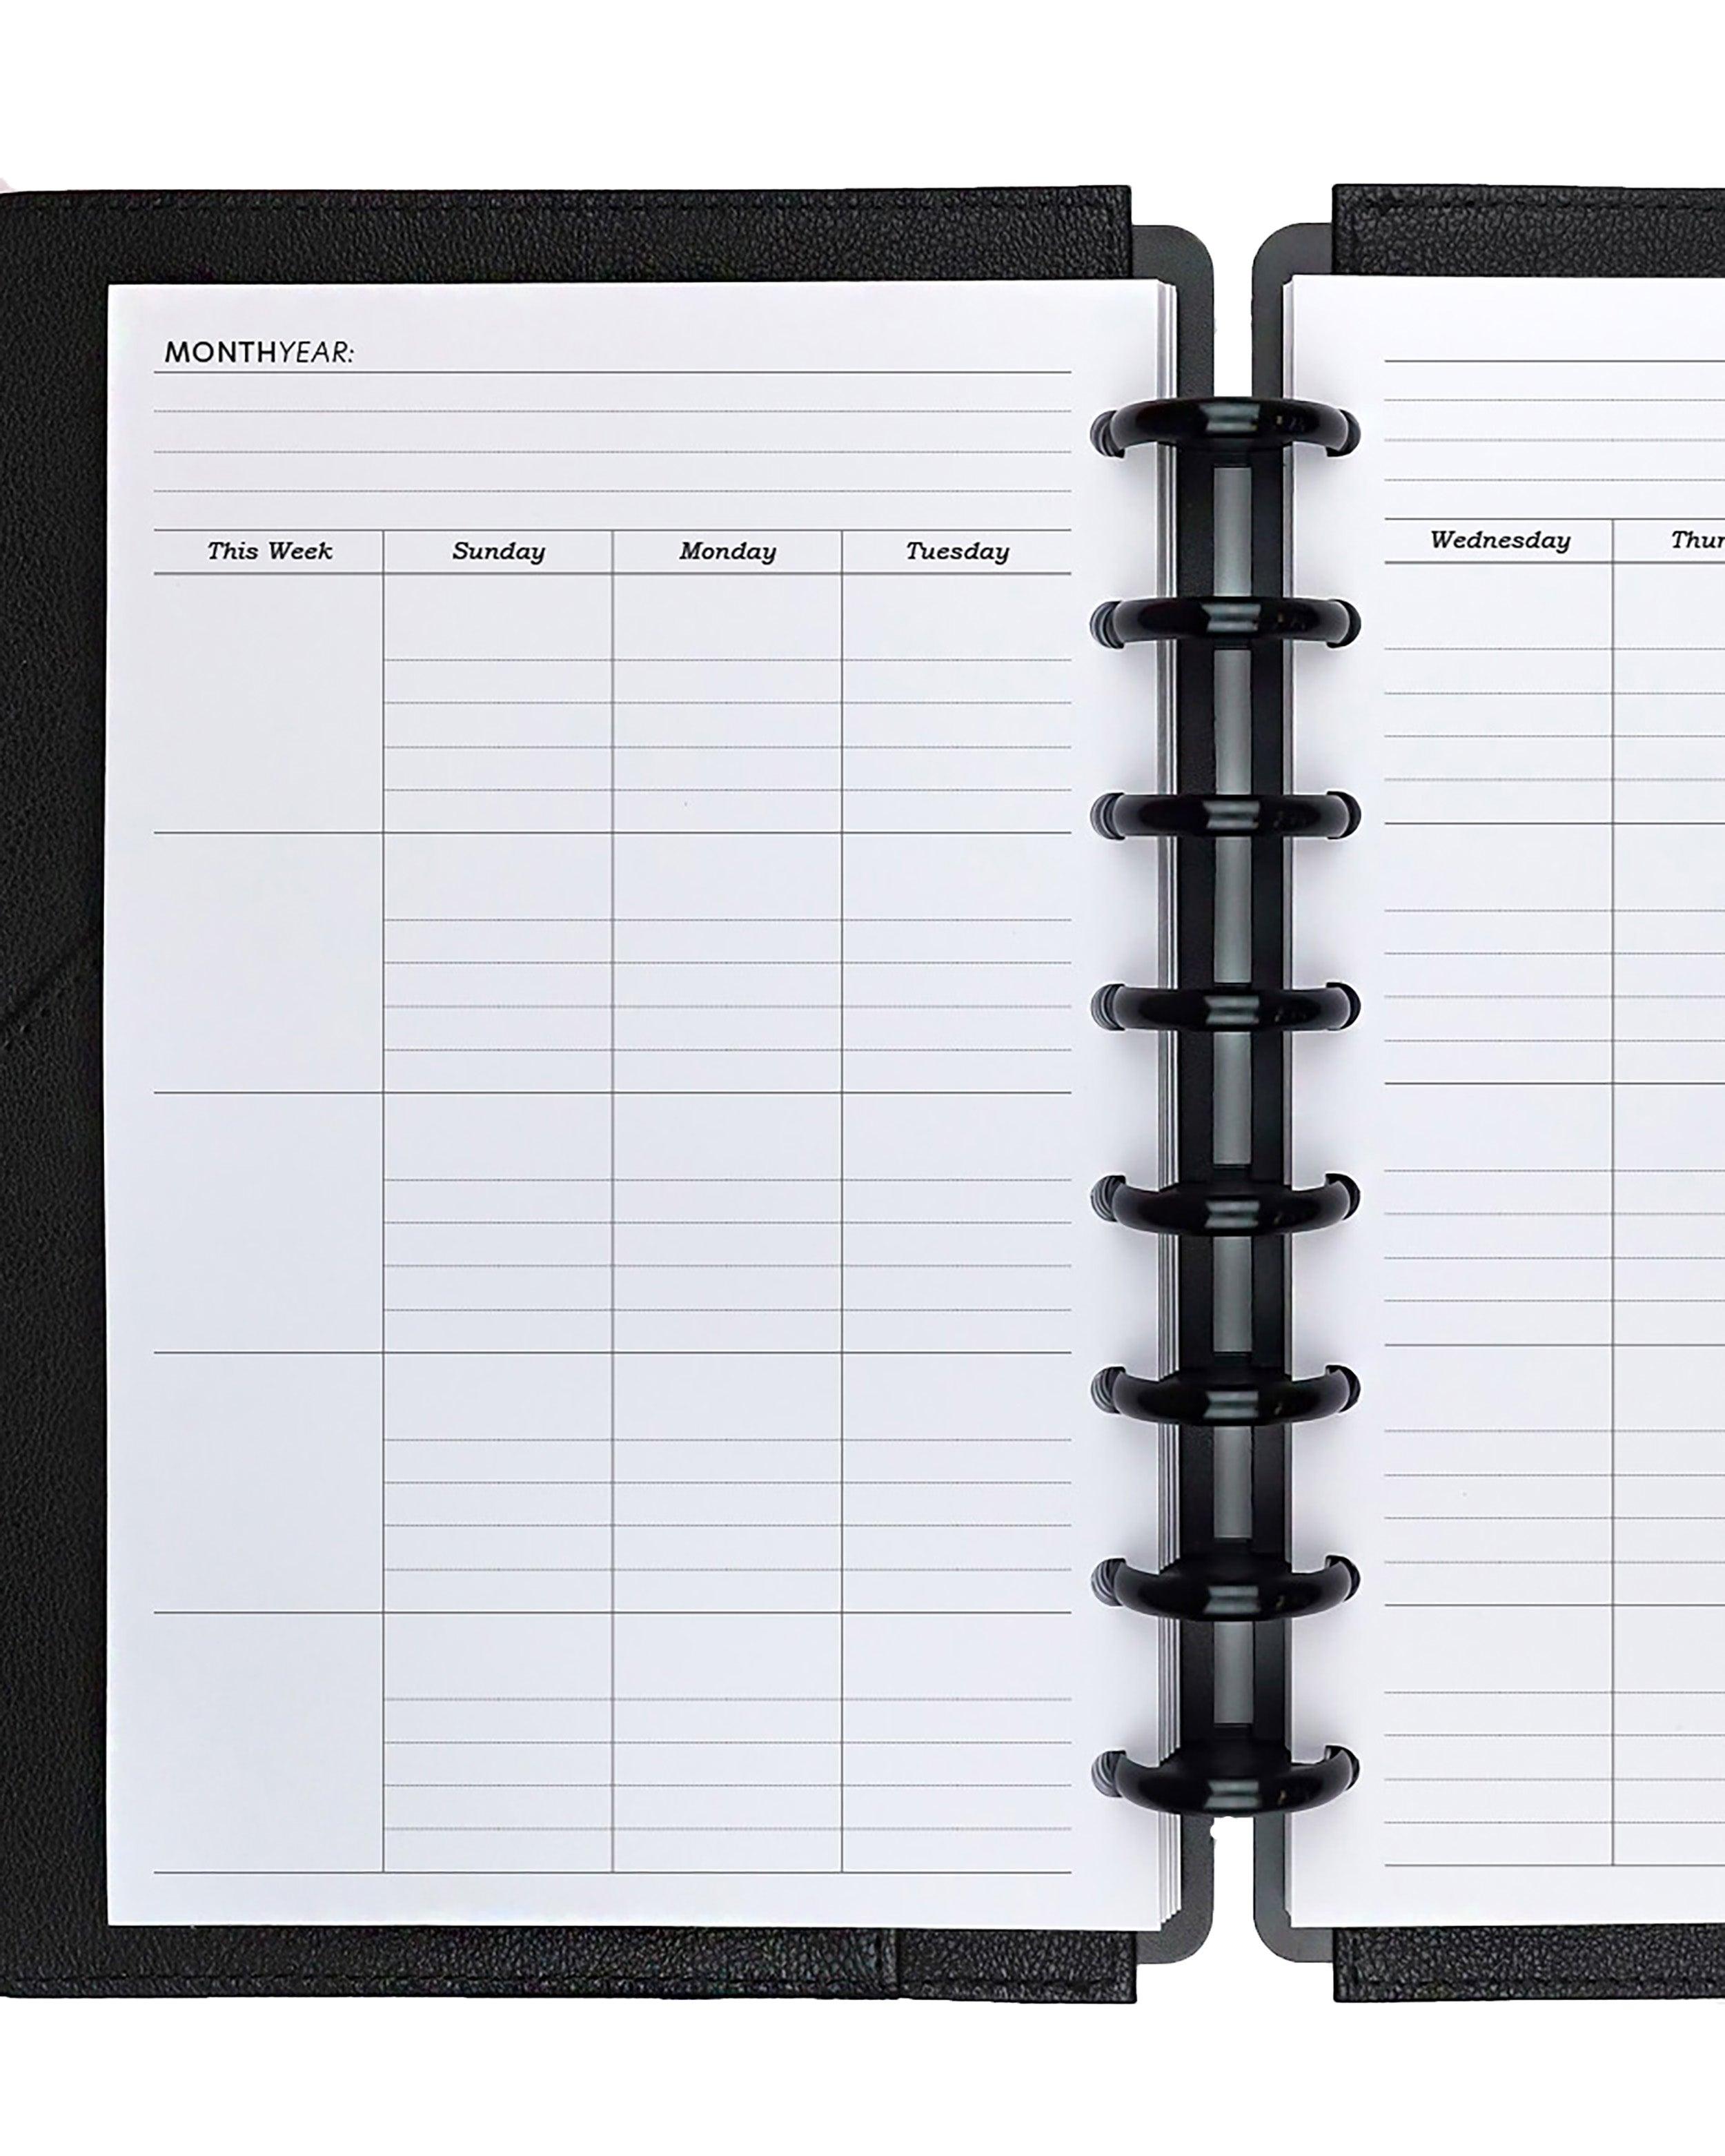 Compact Binder Inserts - 50 Sheets - Dot Grid & Lined - Appointed Lined